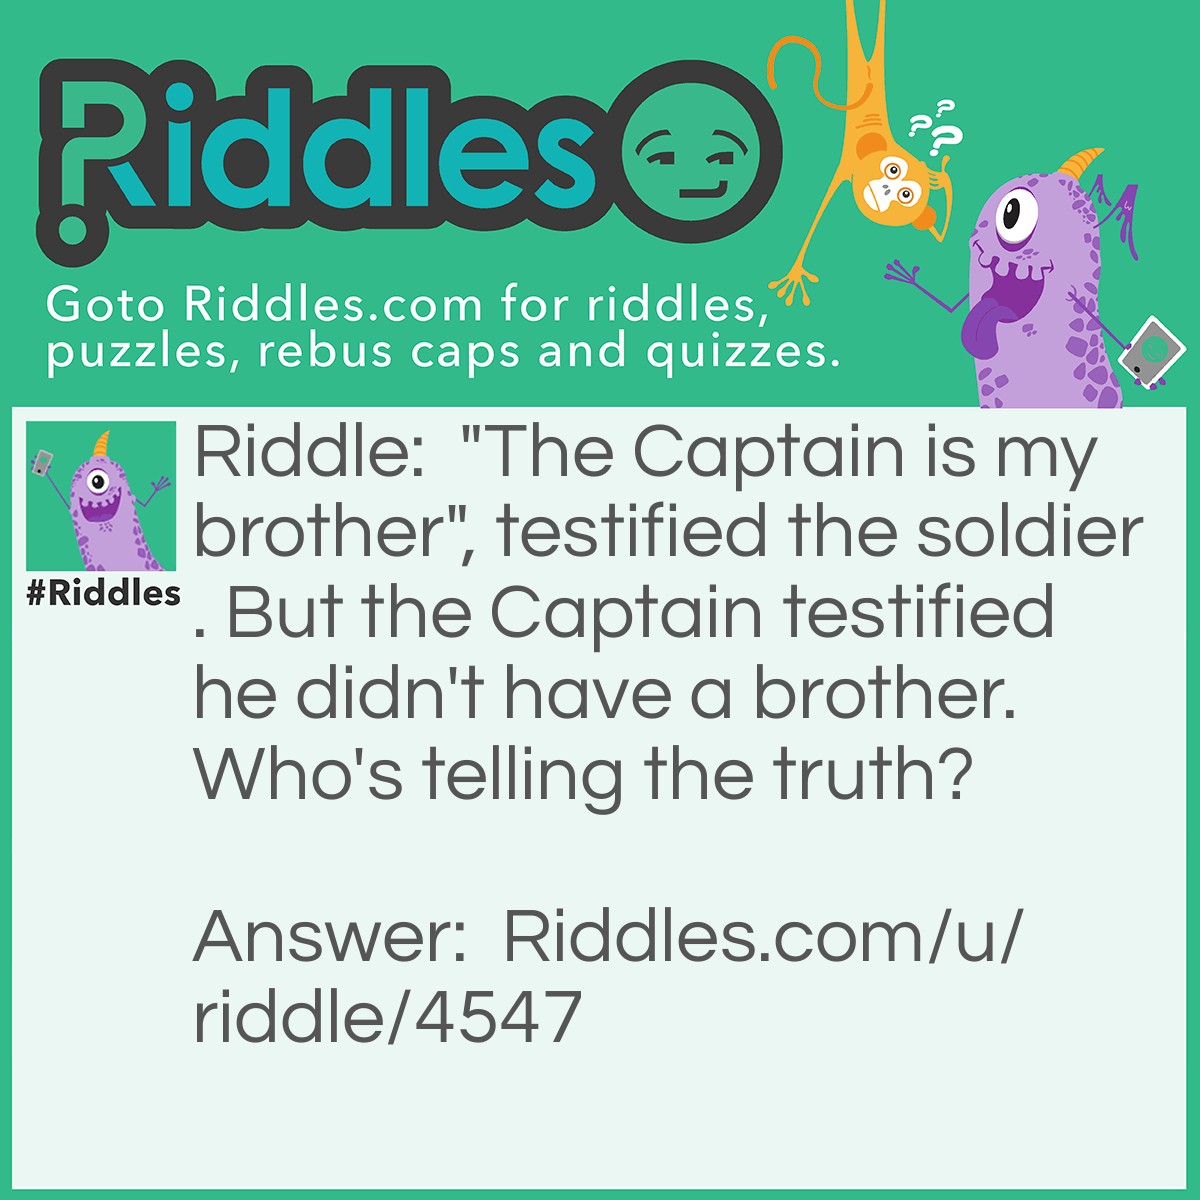 Riddle: "The Captain is my brother", testified the soldier. But the Captain testified he didn't have a brother. Who's telling the truth? Answer: Both- the soldier was his sister.